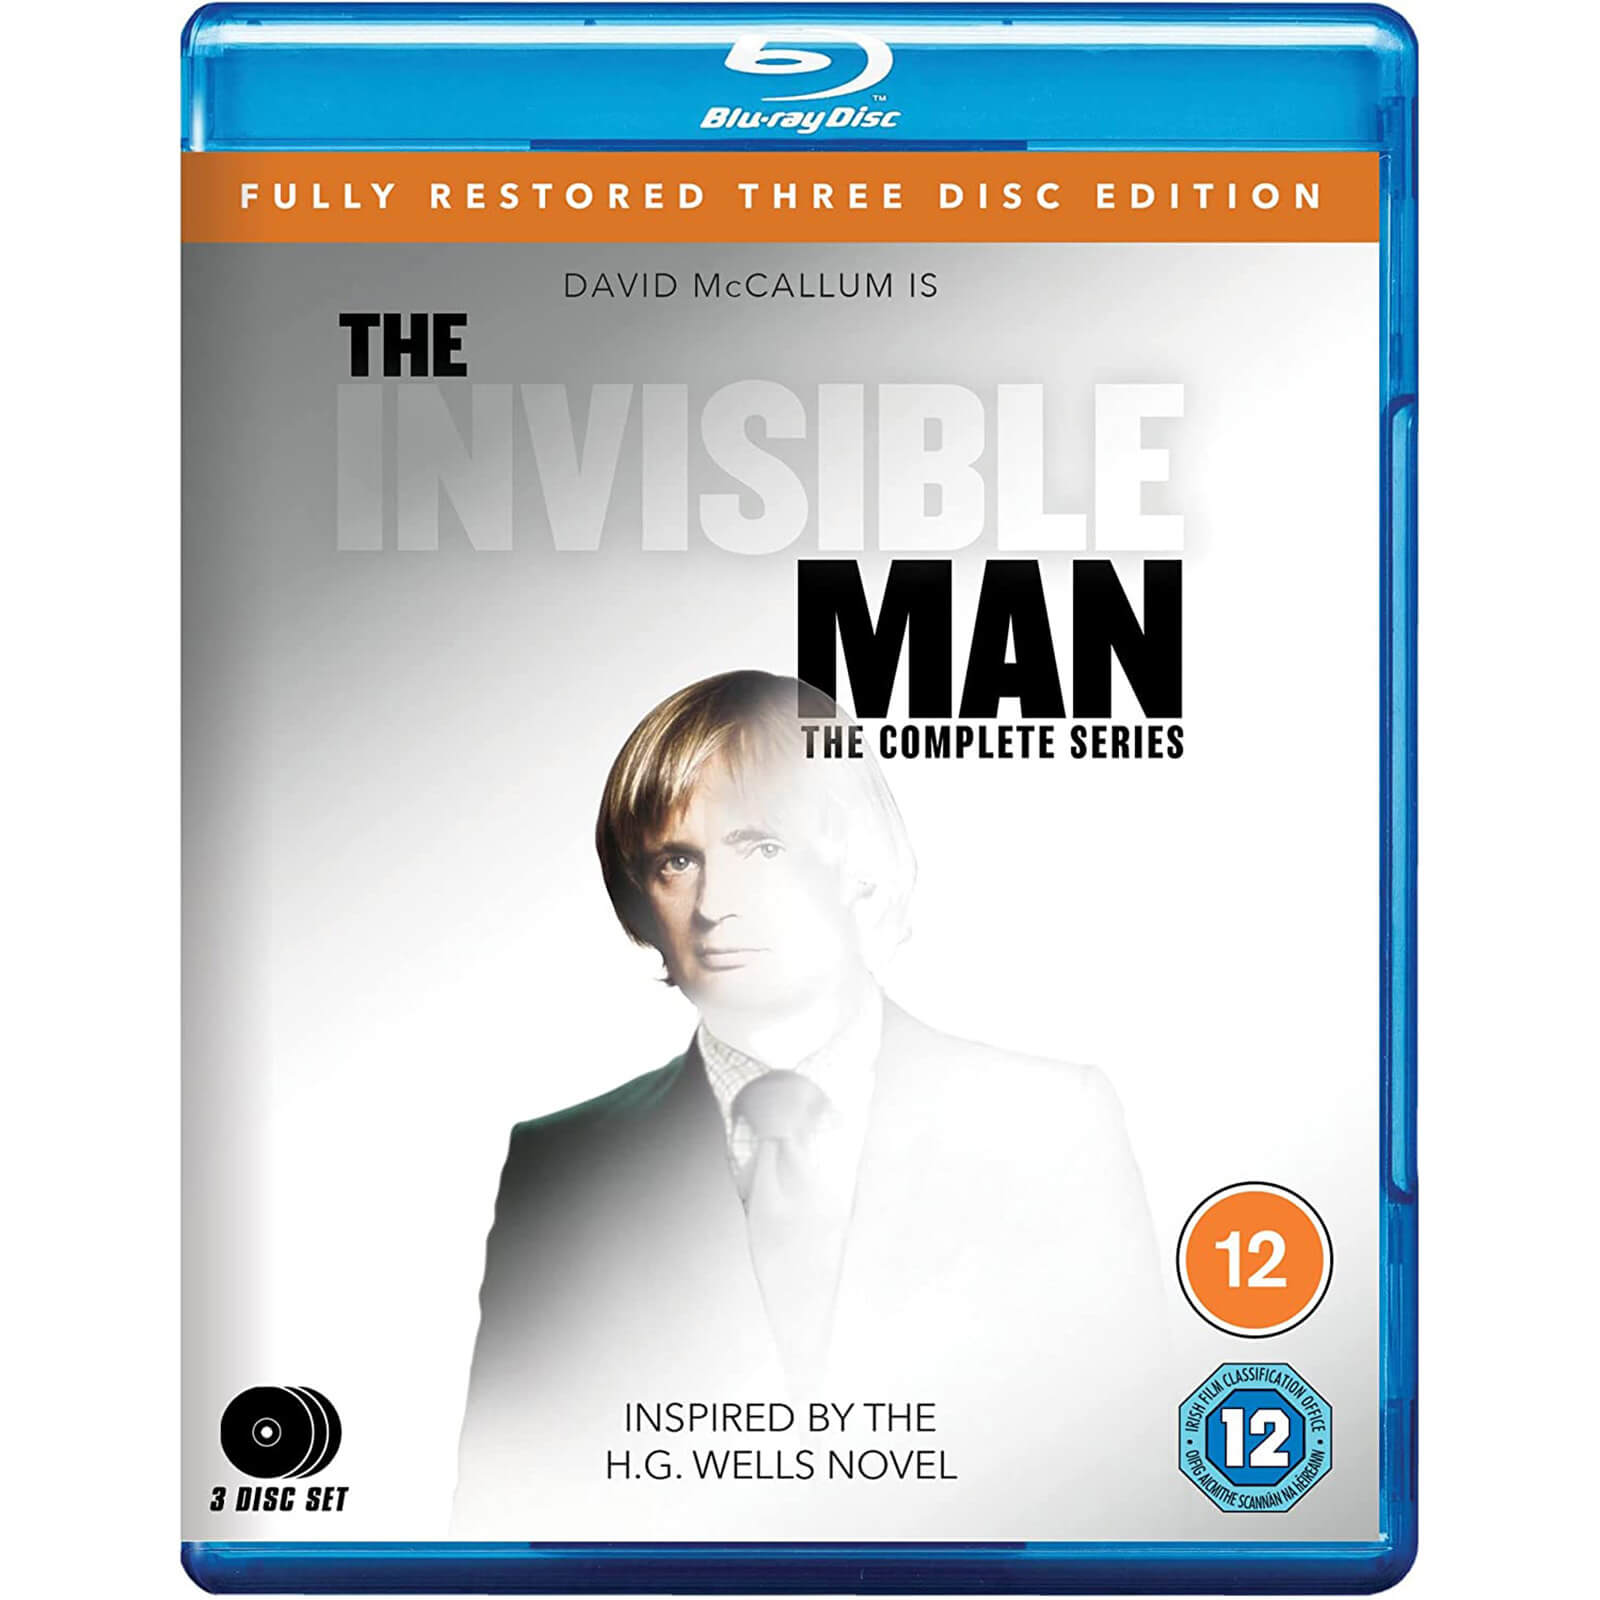 The Invisible Man: The Complete Series (Full HD Restoration)